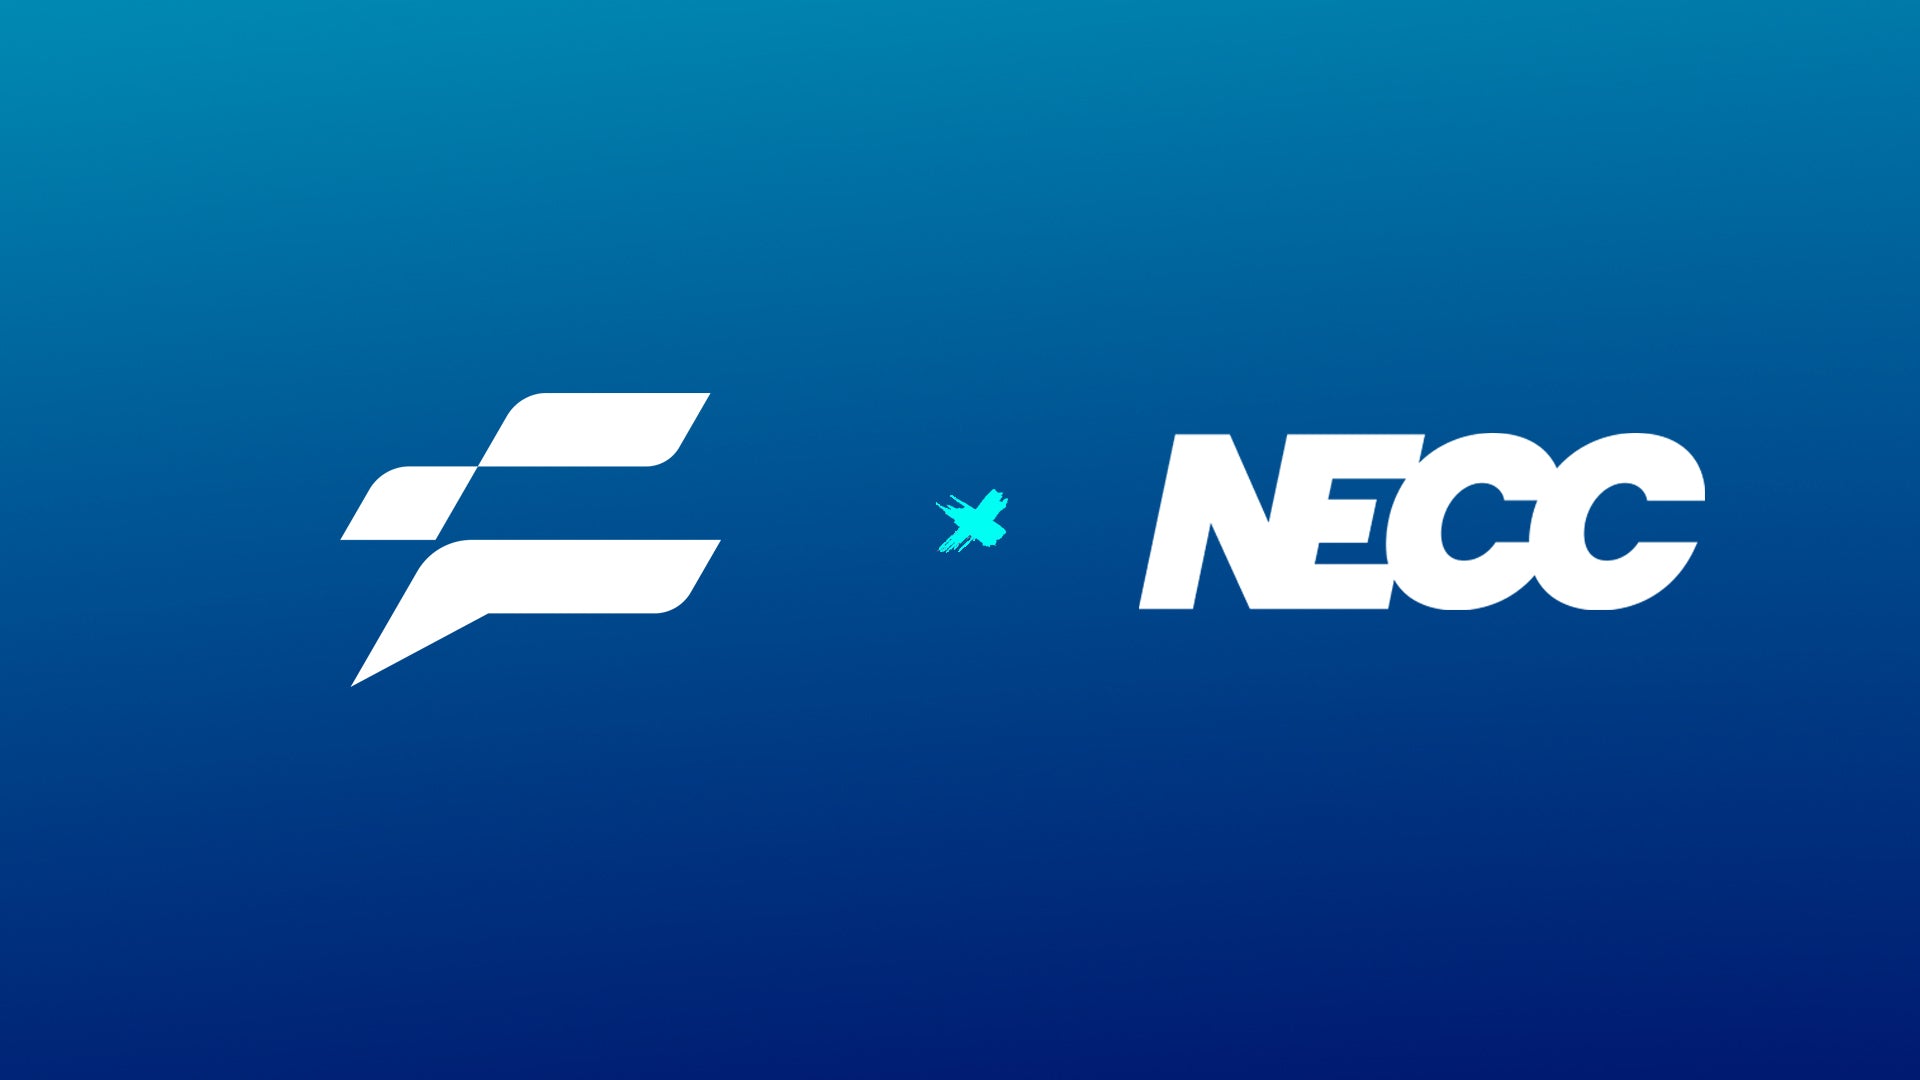 NECC Announces Partnership with FITGMR to Support Players' Health and Well-Being